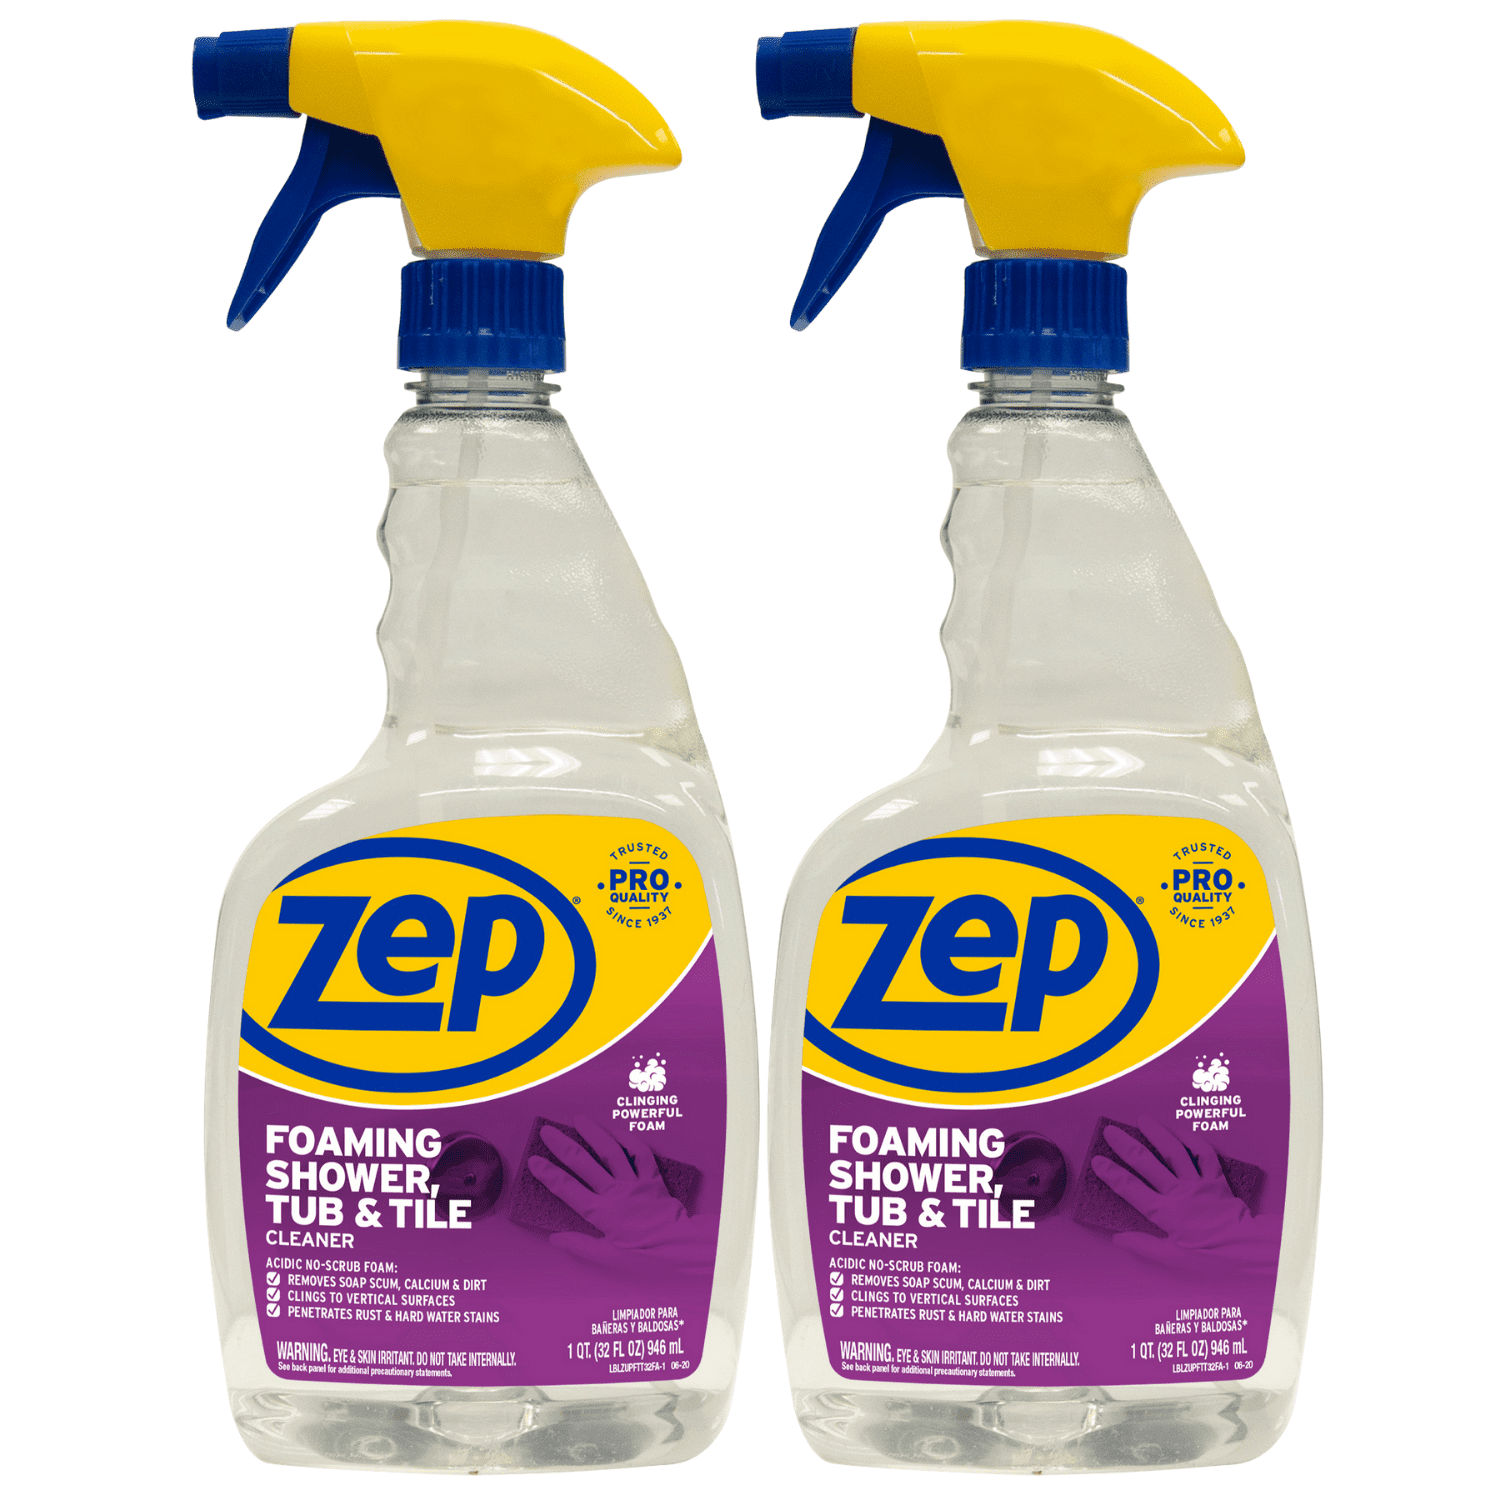 Zep Foaming Shower Tub And Tile Cleaner 32 Oz Pack Of 2 Spray Wait